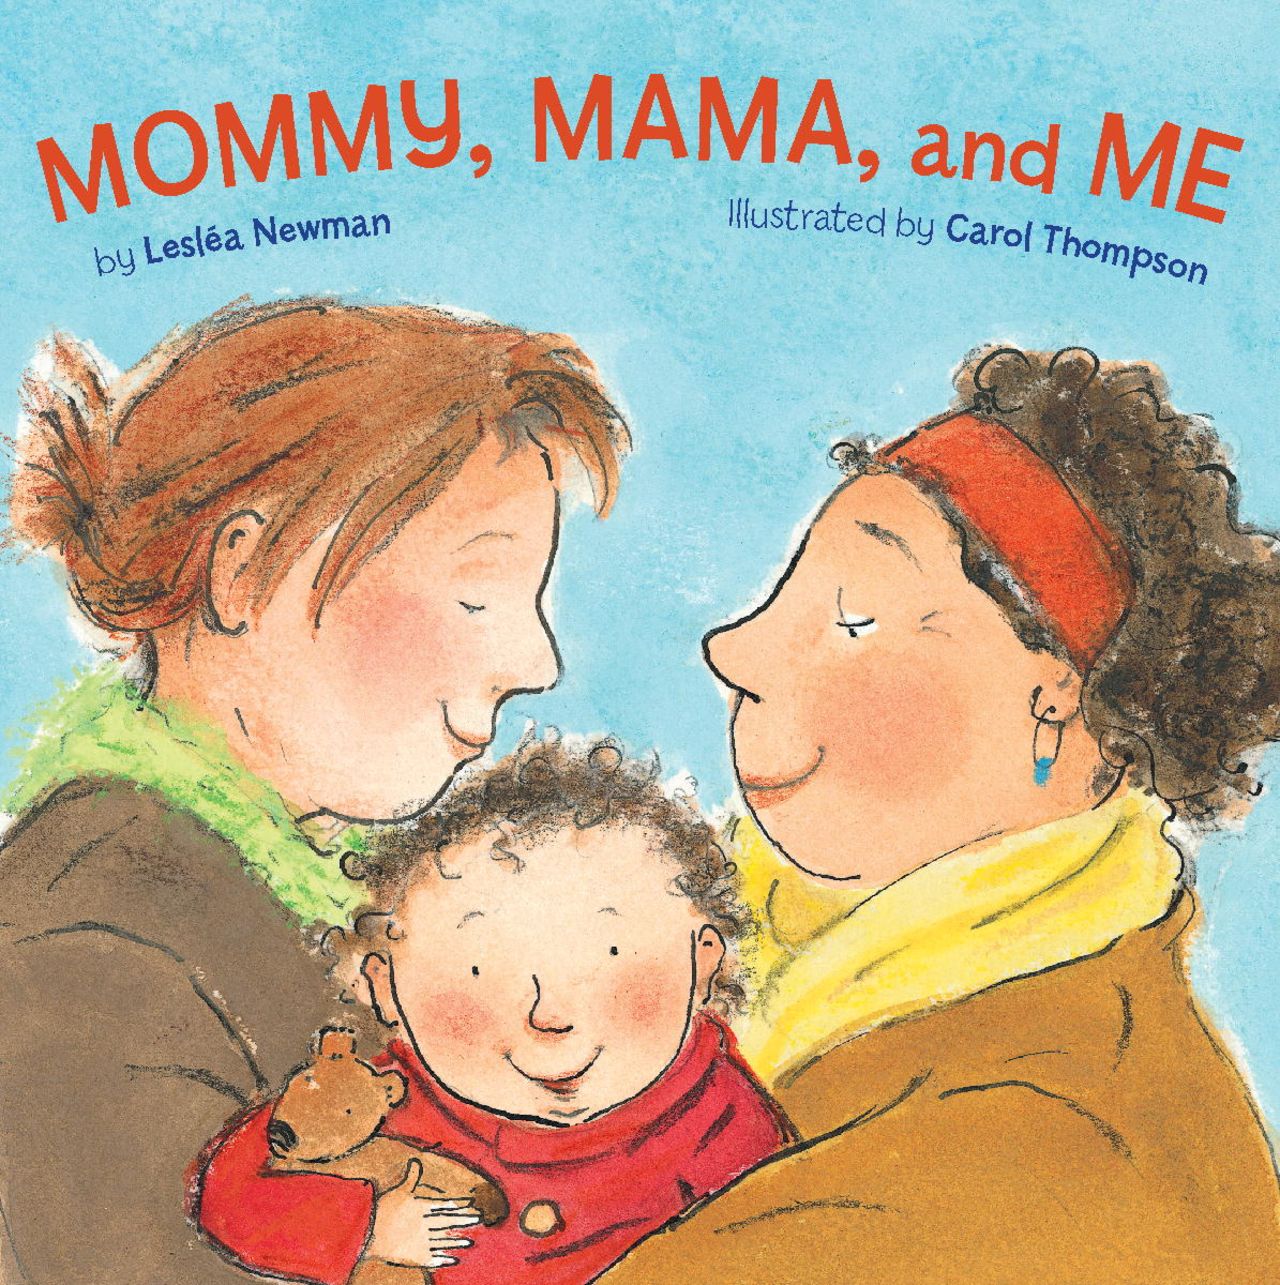 Leslea Newman writes a two-mommy book for the younger set. 